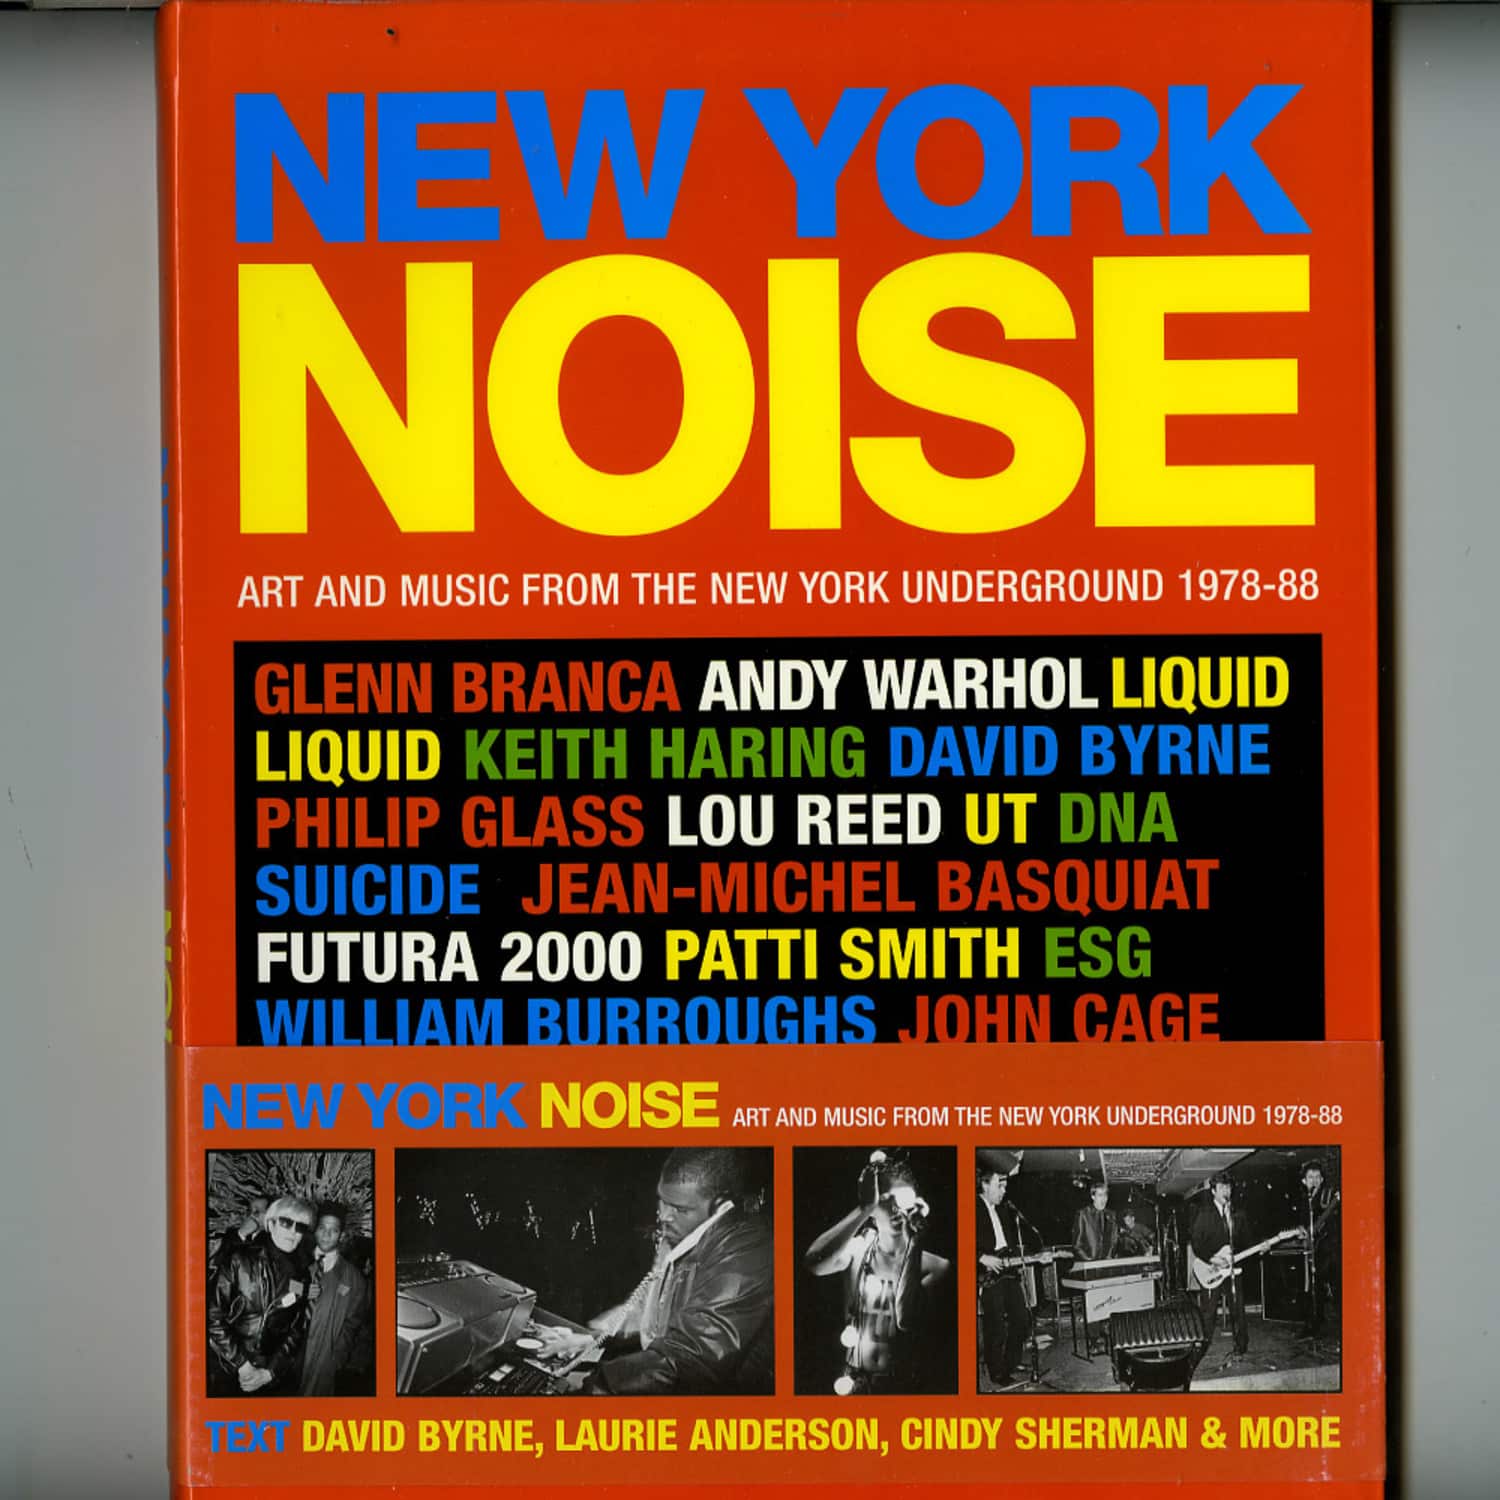 Books - New york noise - art and music from the ny underground 1978 - 1988